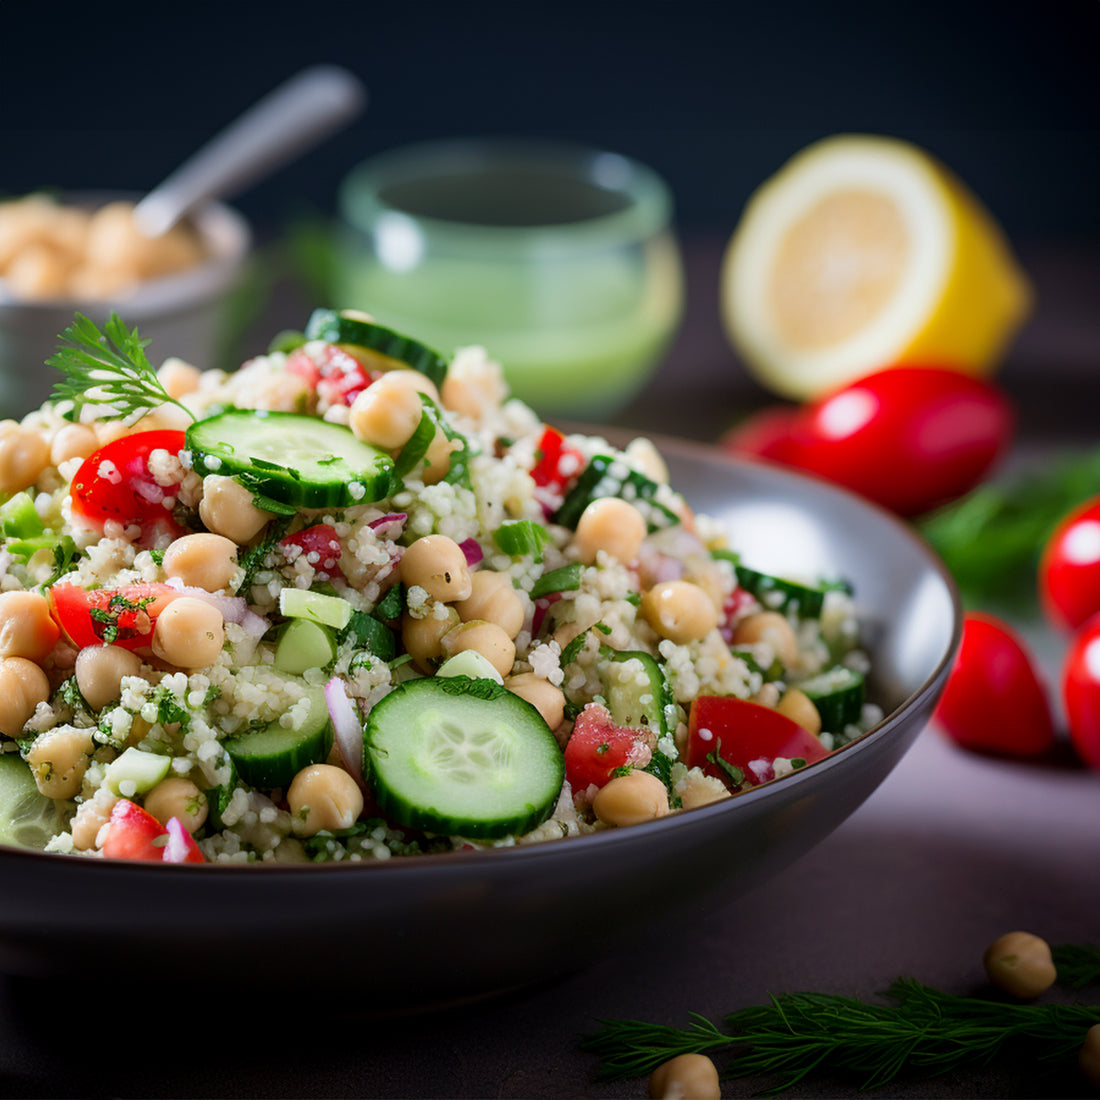 High Protein Foxtail Millet Salad with Feta Cheese